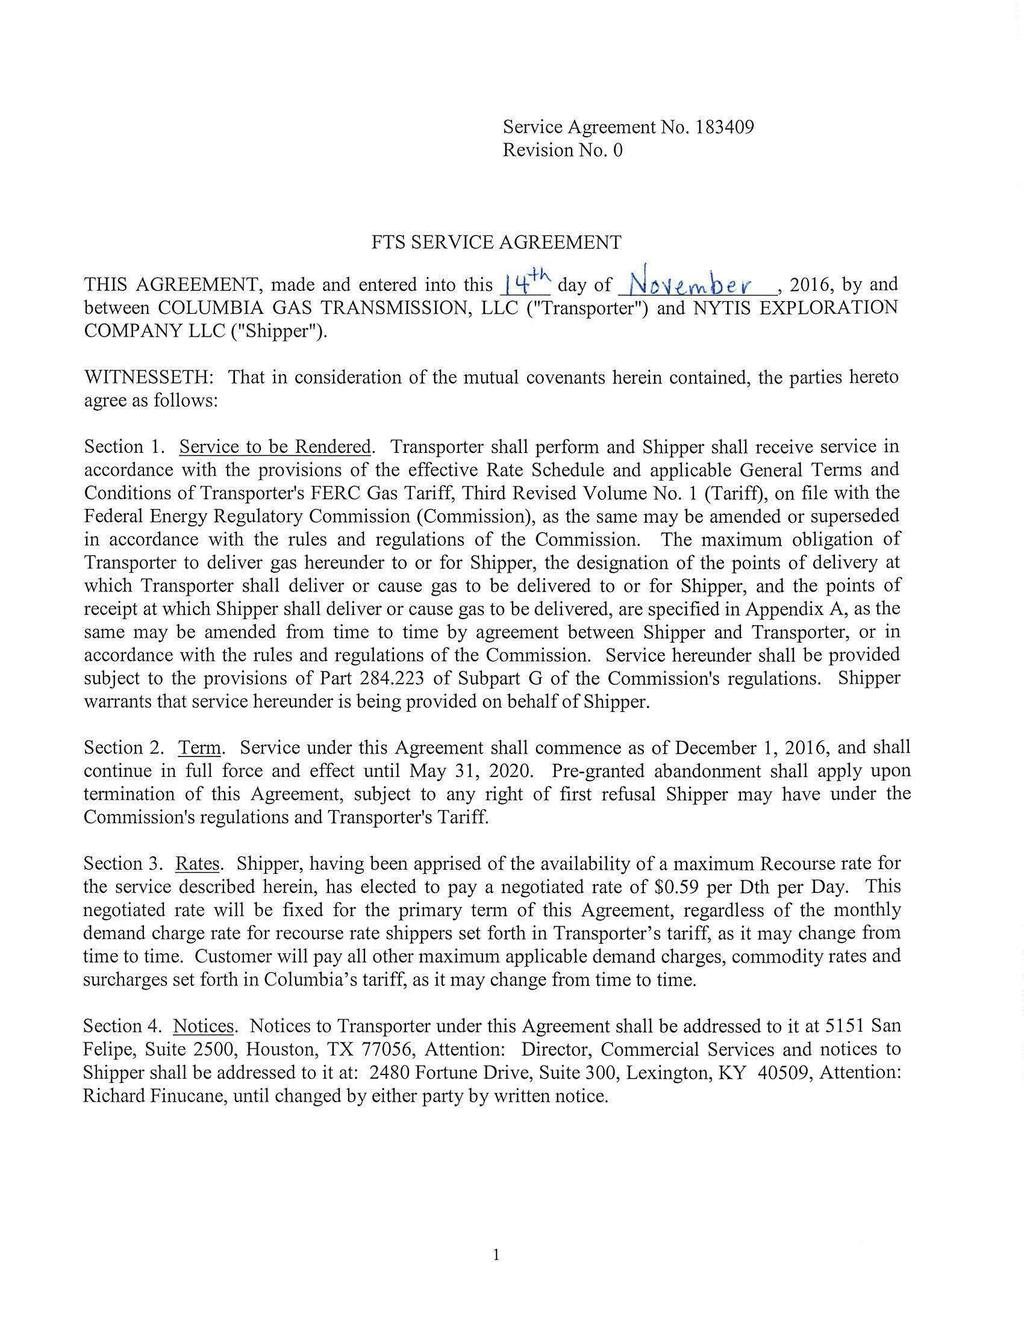 Service Agreement No. 183409 Revision No. 0 FTS SERVICE AGREEMENT THIS AGREEMENT, made and entered into this I 4-+'"'- day of ND 'U.